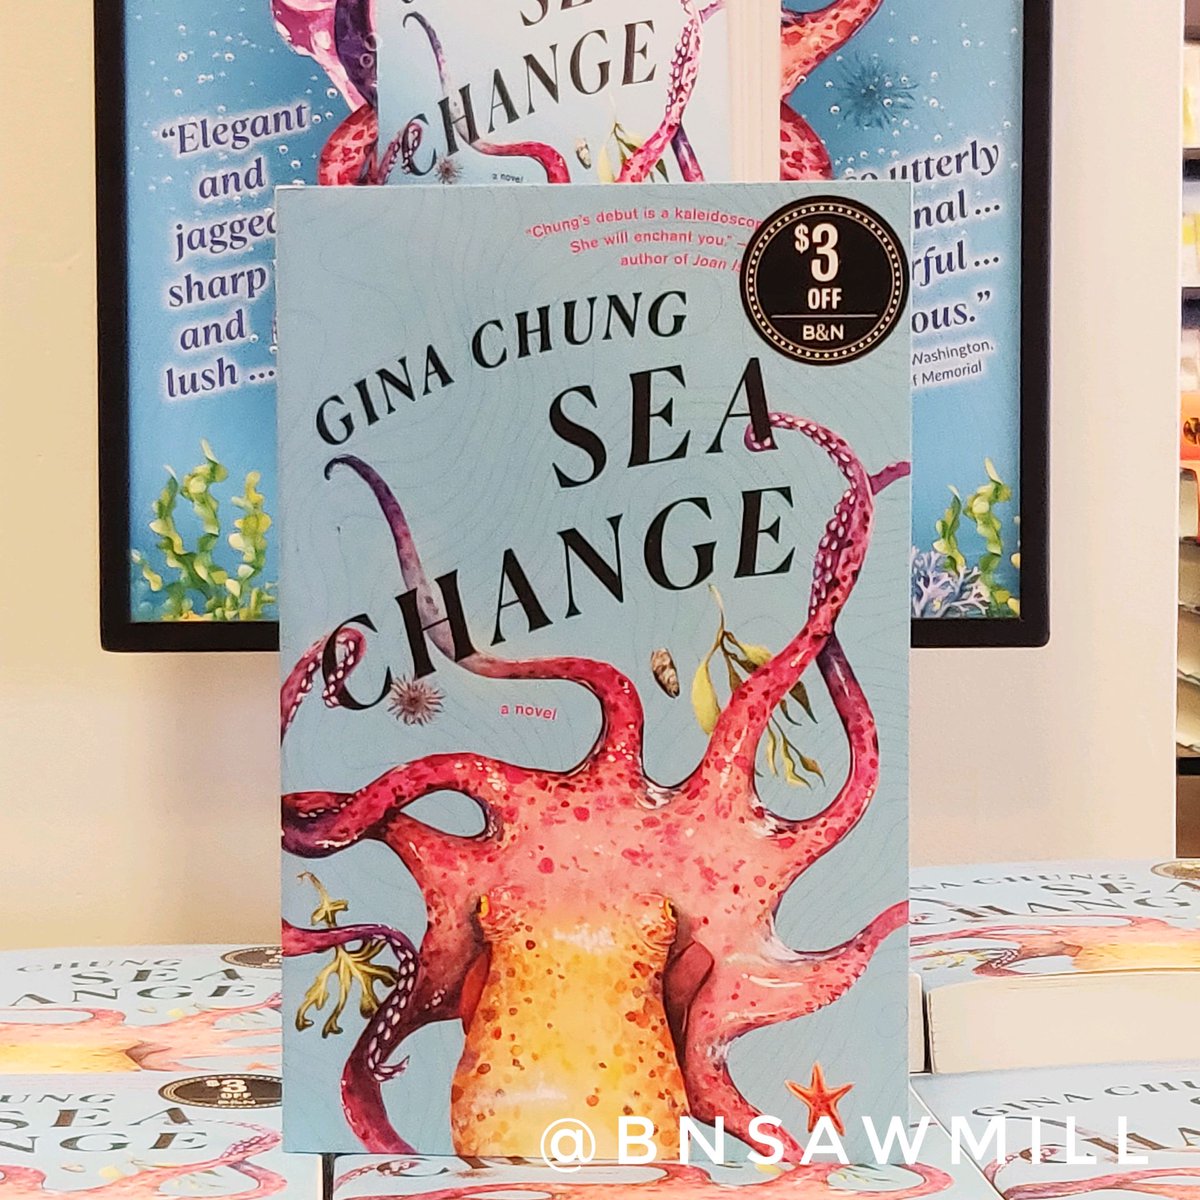 Sea Change is the new Discover pick this month!

#bnsawmill #bndiscoverpick #newbooks #seachange #ginachung #newfiction